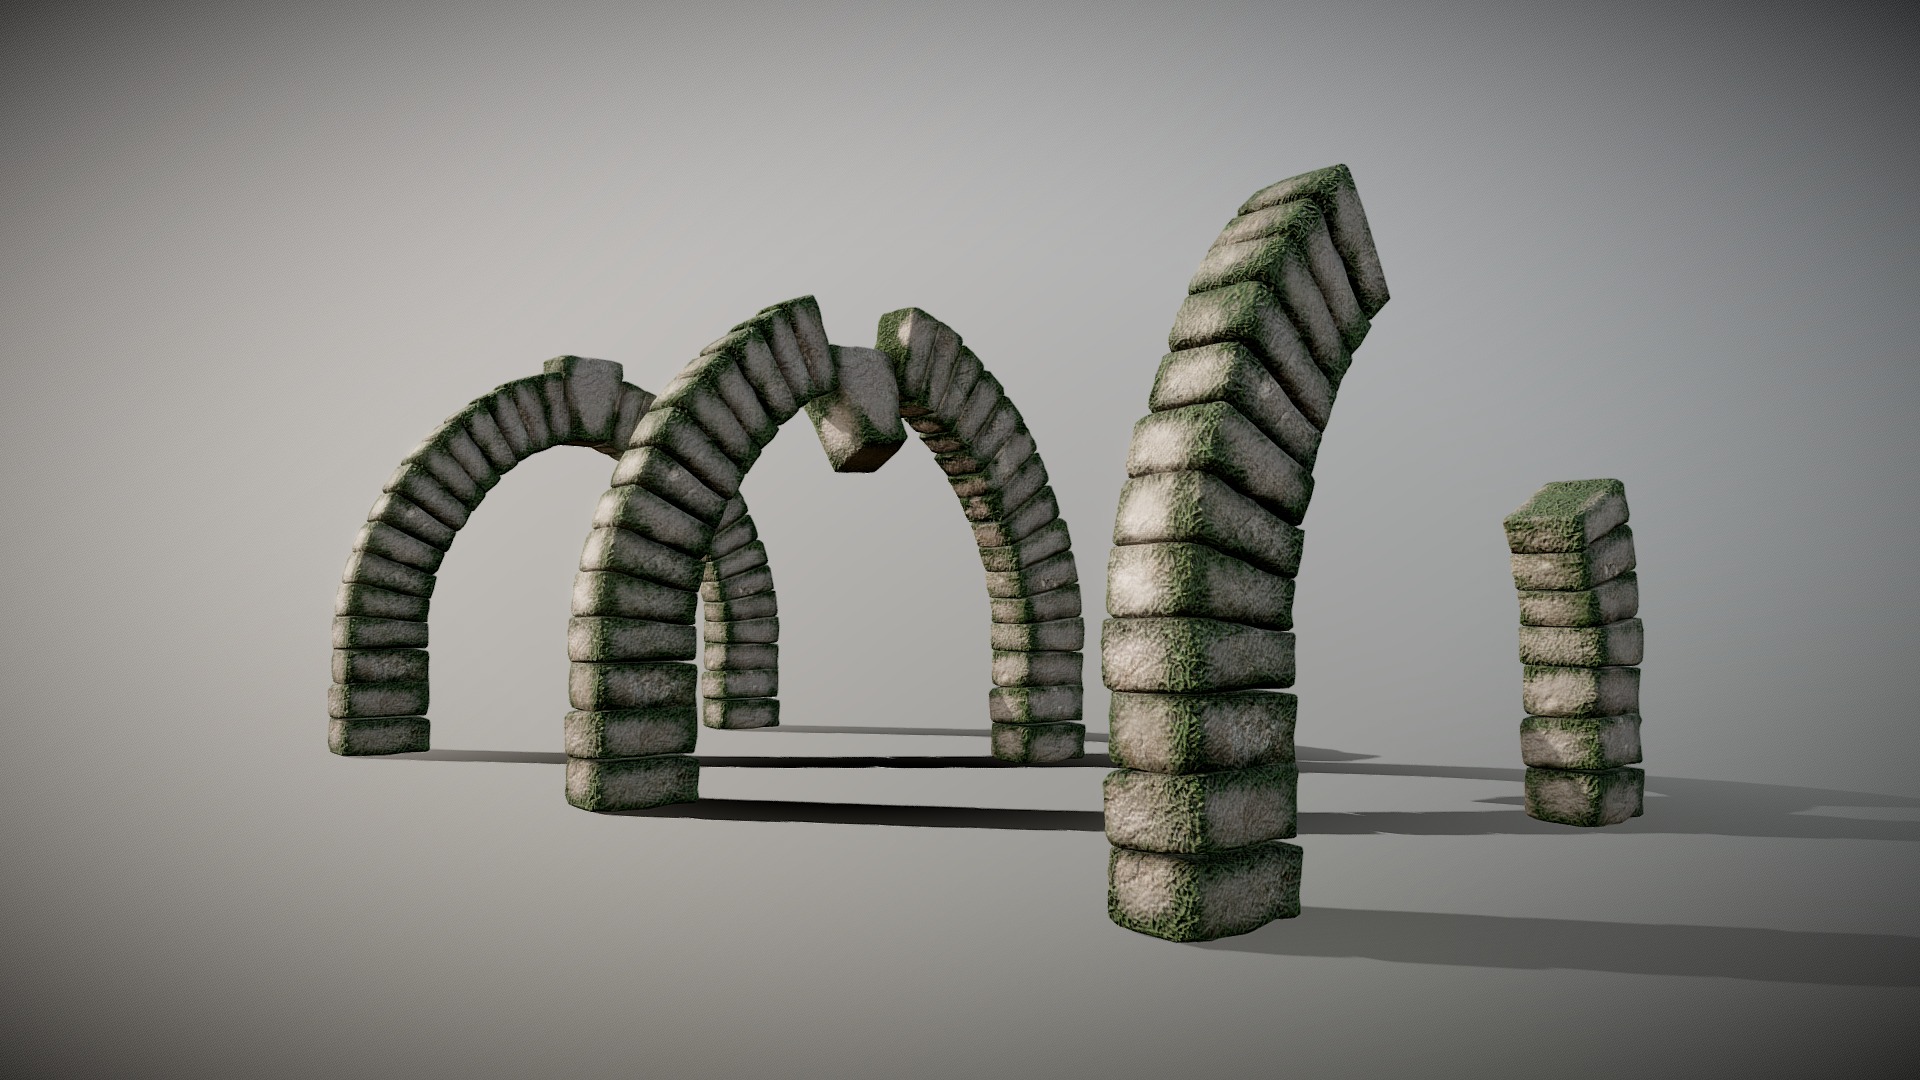 Modular Asset

Details

Game ready assets with LODs

Textures are 4K resolution

3 Variations

Contact me for any issue or questions! https://www.artstation.com/bpaul/profile - Ruins: Arc - Buy Royalty Free 3D model by Paul (@nathan.d1563) 3d model